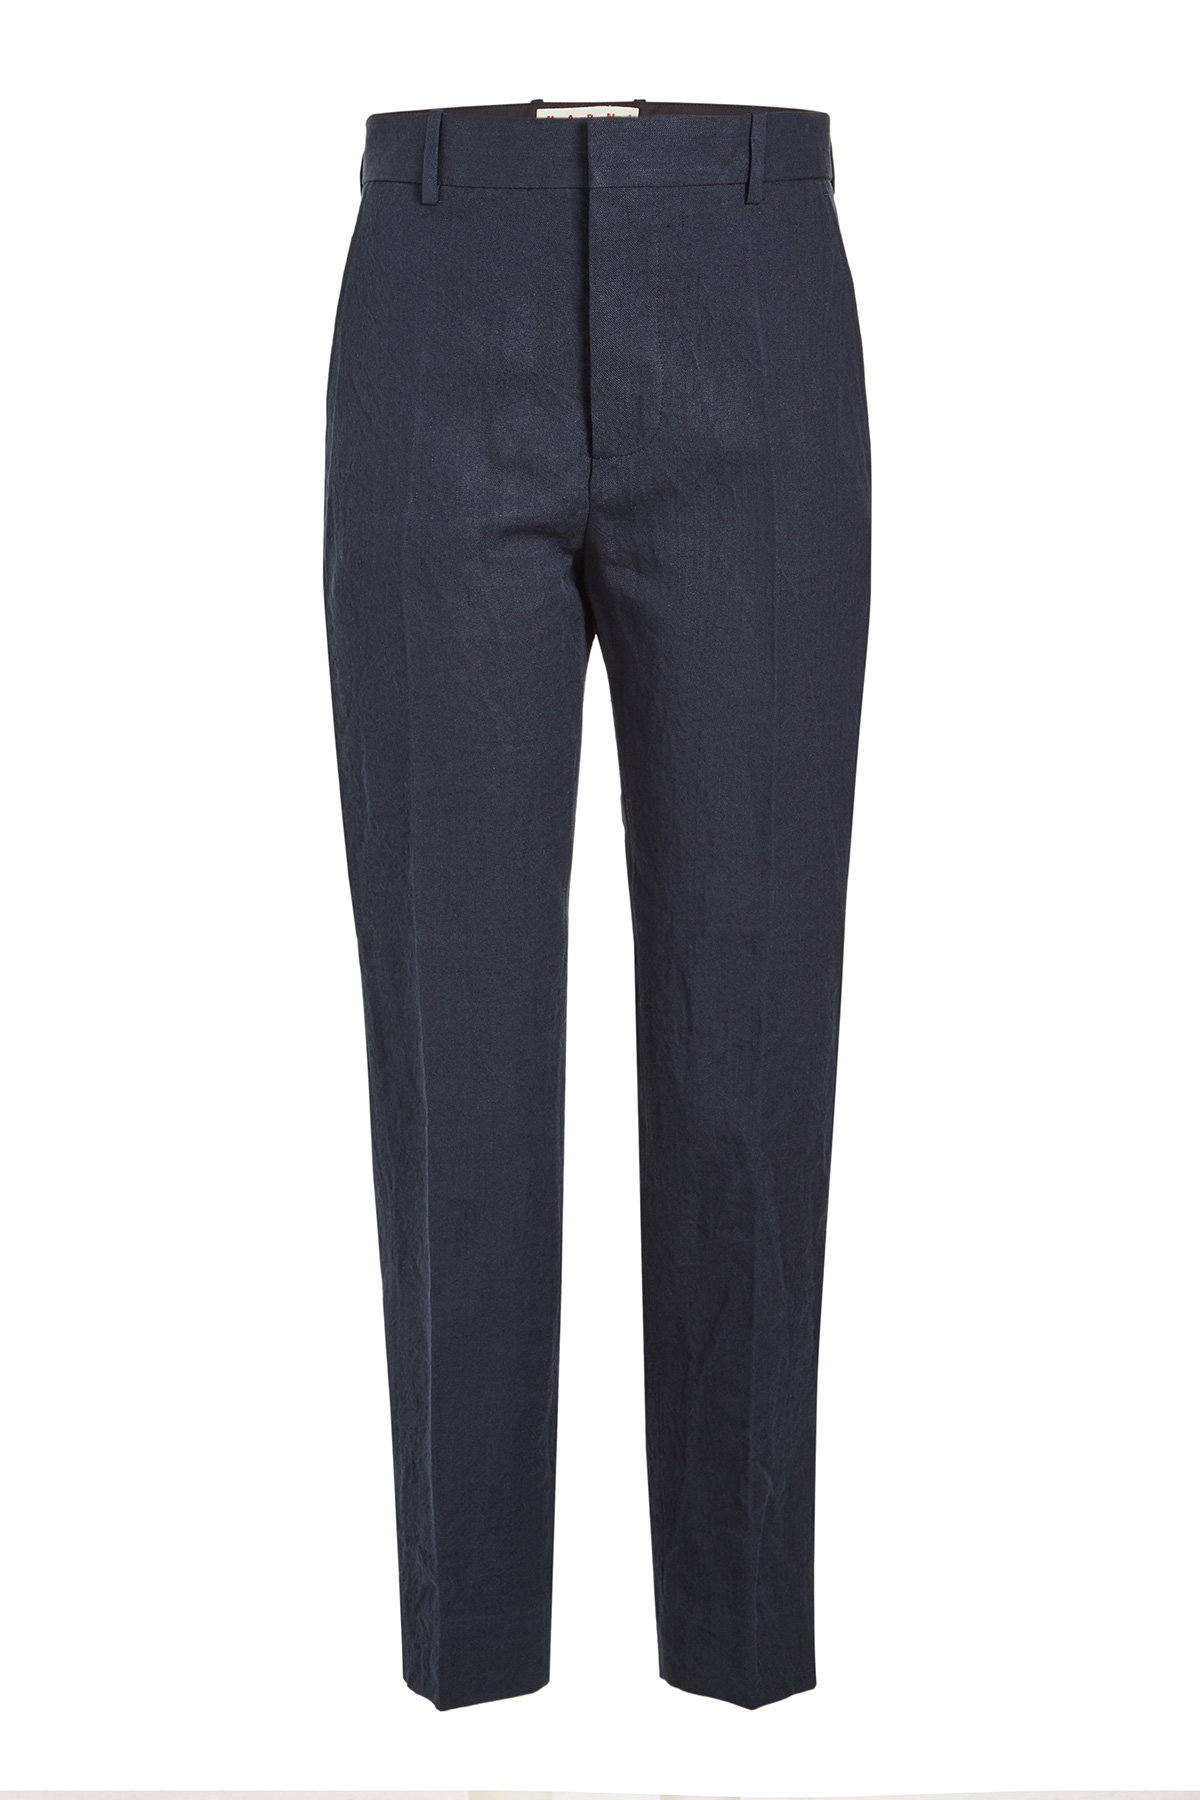 Marni - Cropped Linen Pants with Cotton